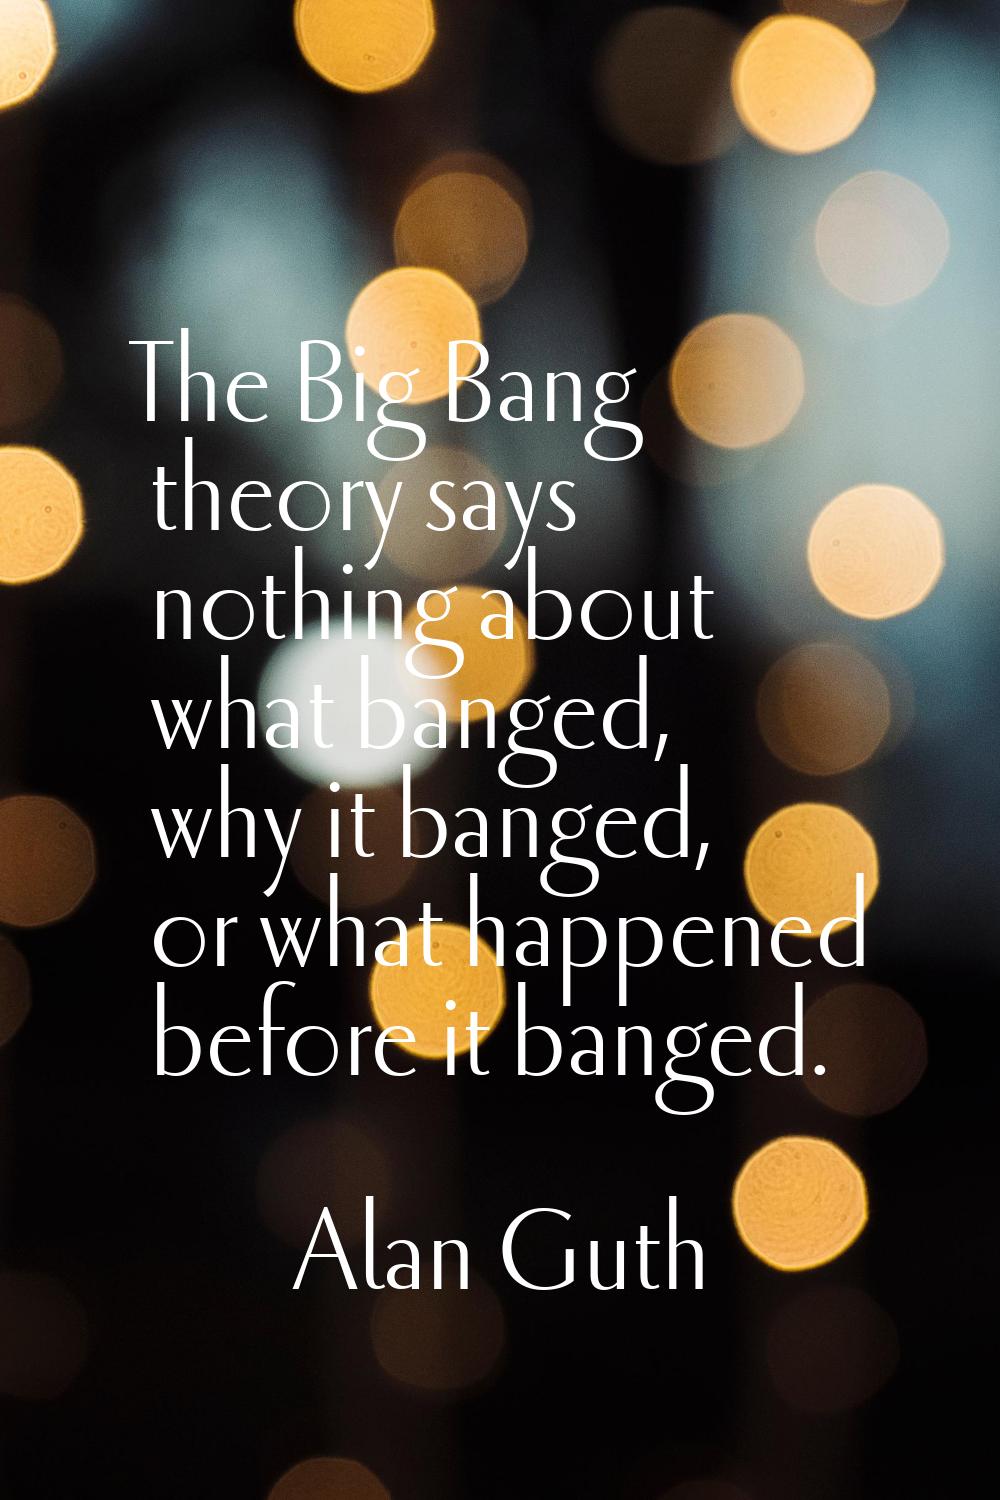 The Big Bang theory says nothing about what banged, why it banged, or what happened before it bange